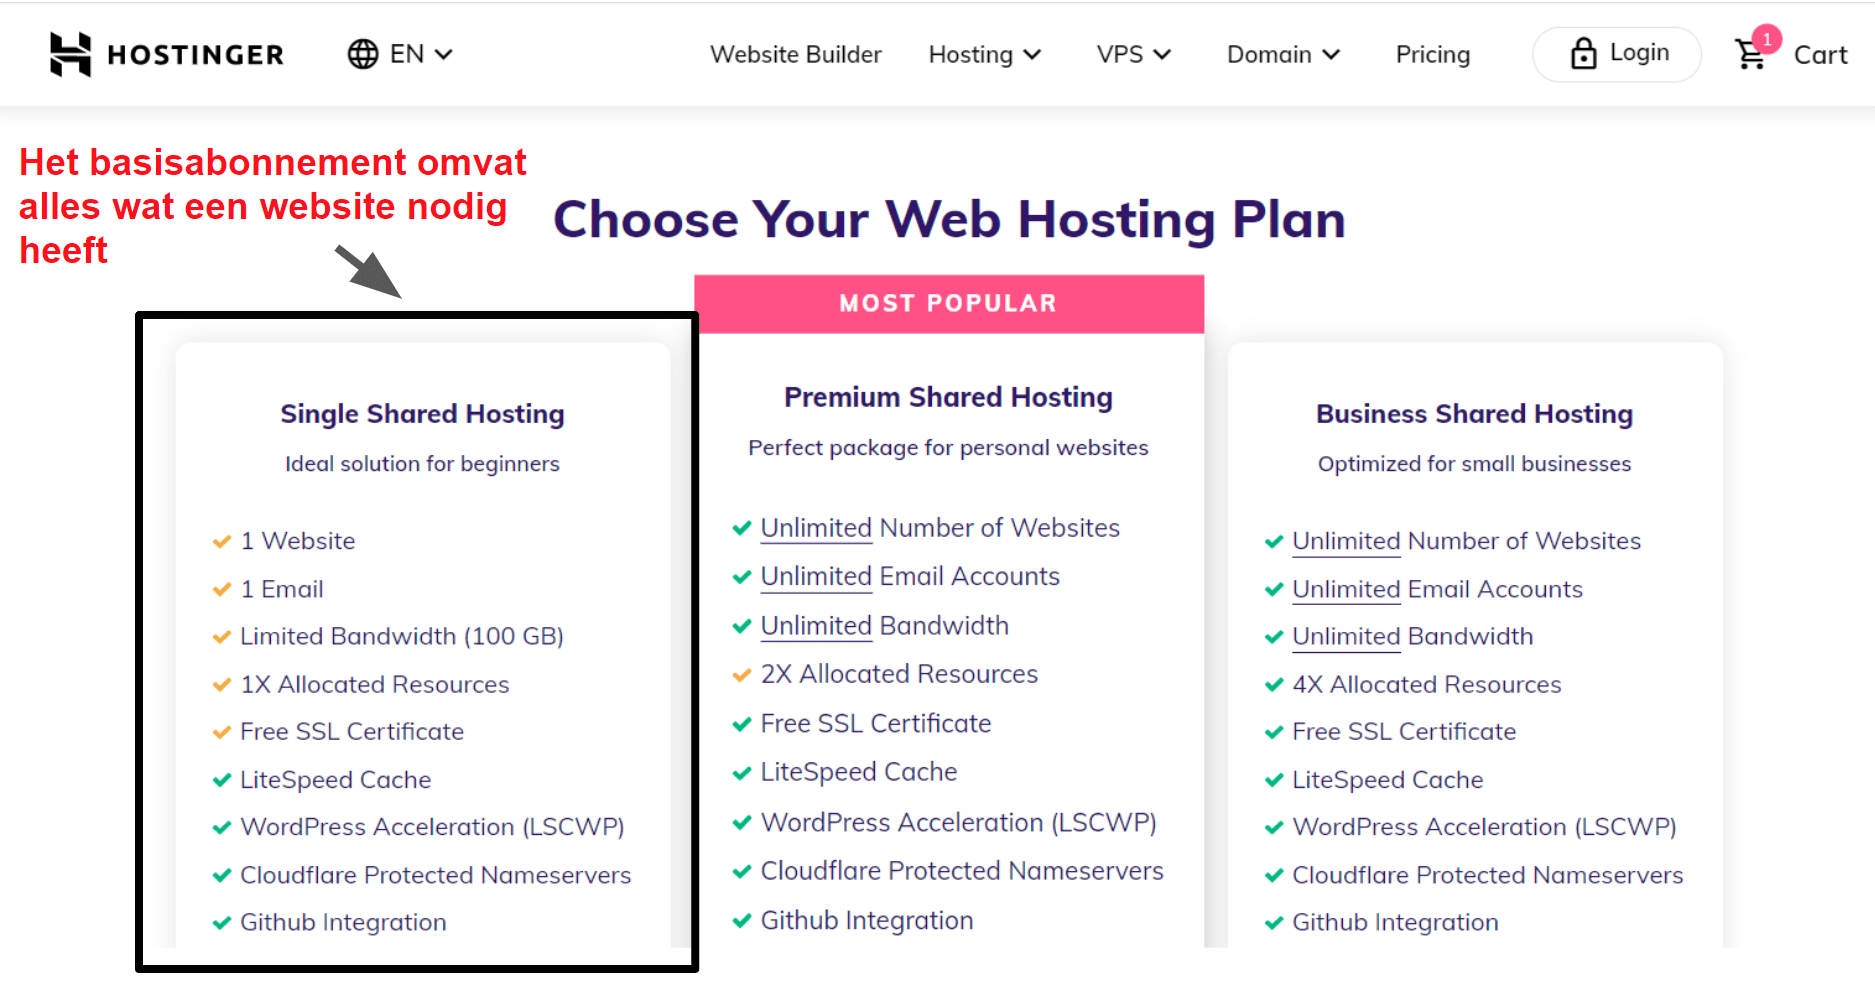 hosting plan features_NL